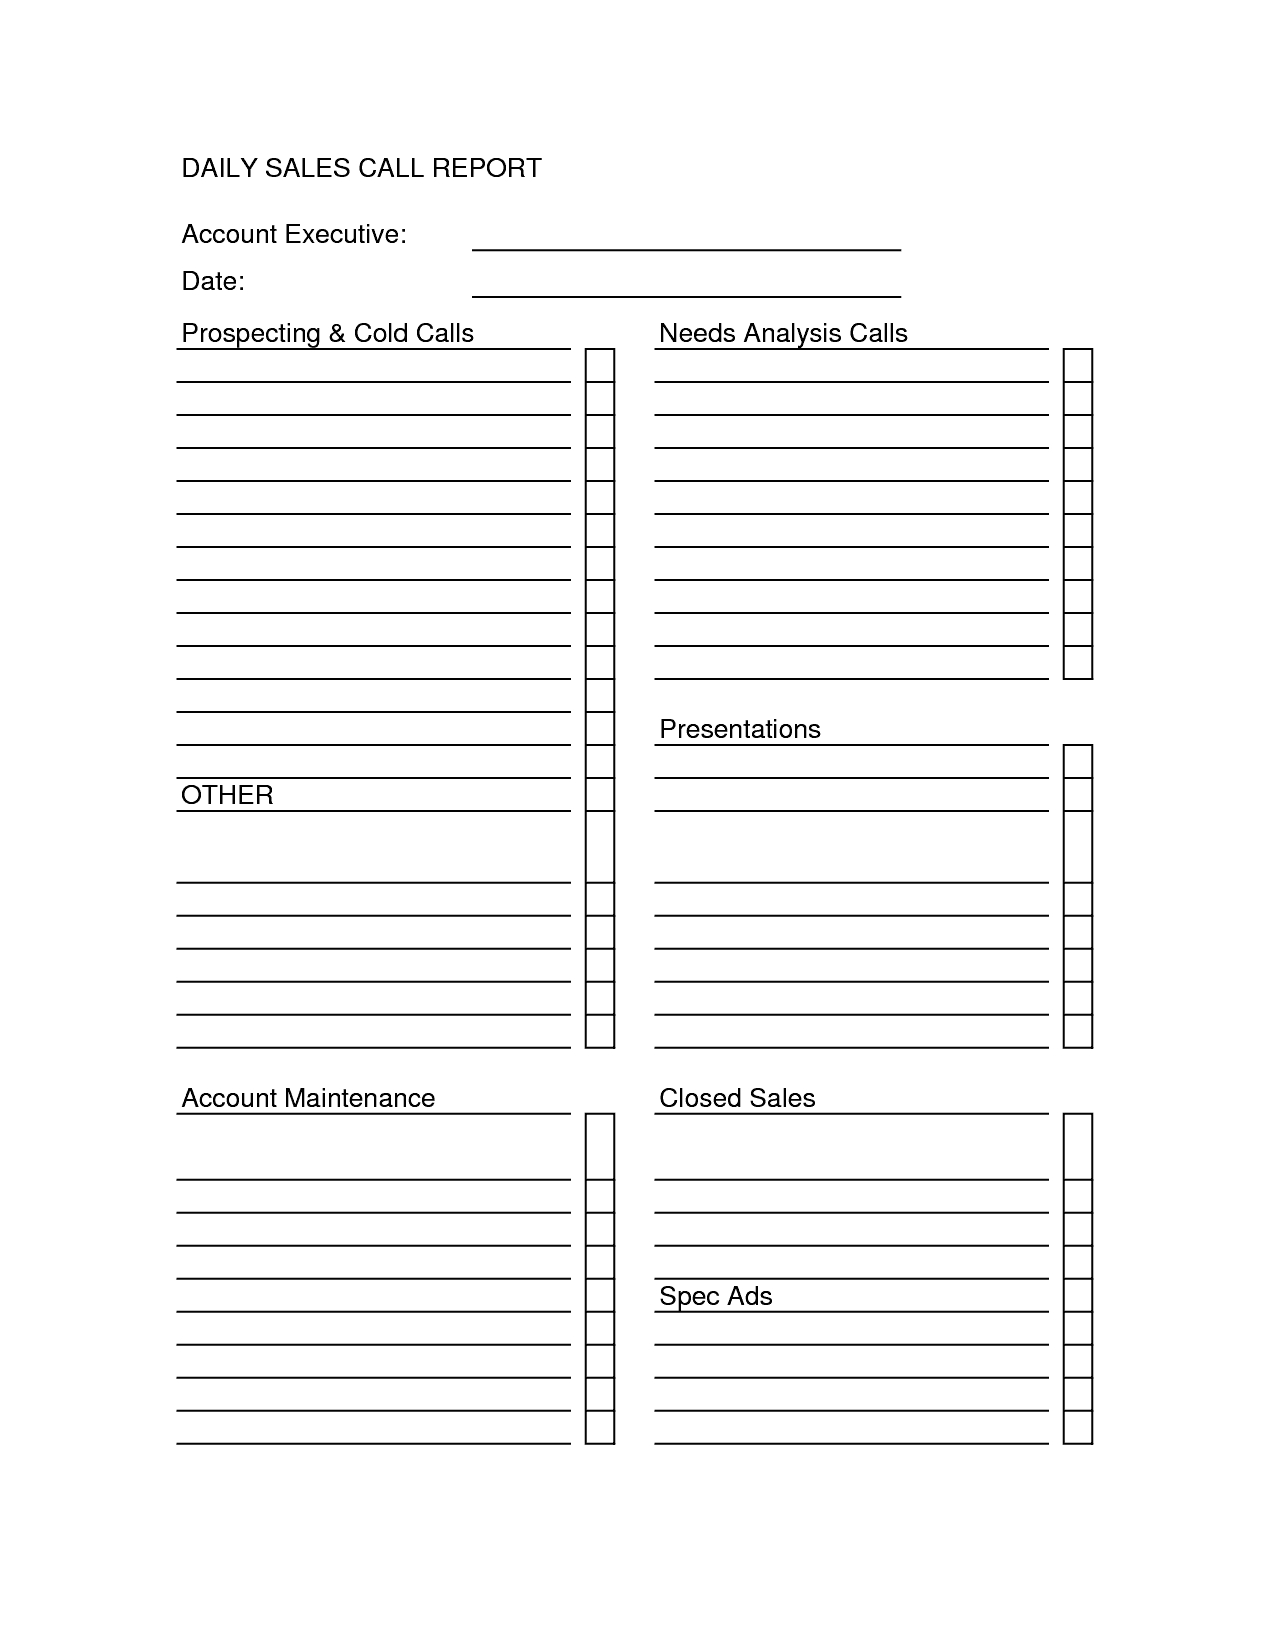 Sales Call Report Templates - Word Excel Fomats Regarding Daily Sales Call Report Template Free Download